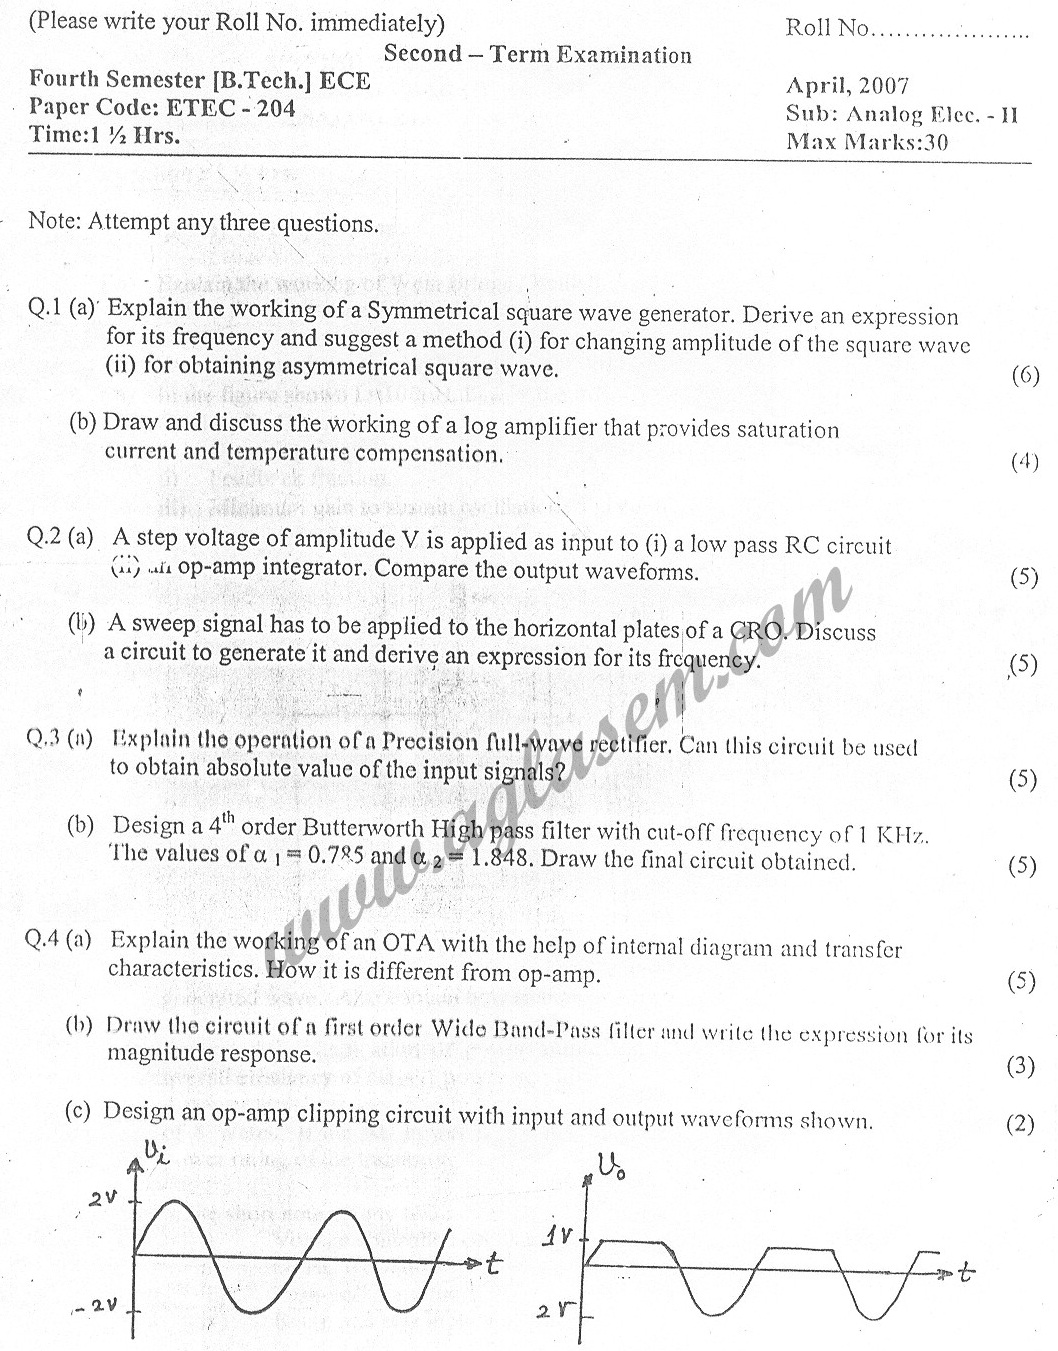 GGSIPU Question Papers Fourth Semester – Second Term 2007 – ETEC-204